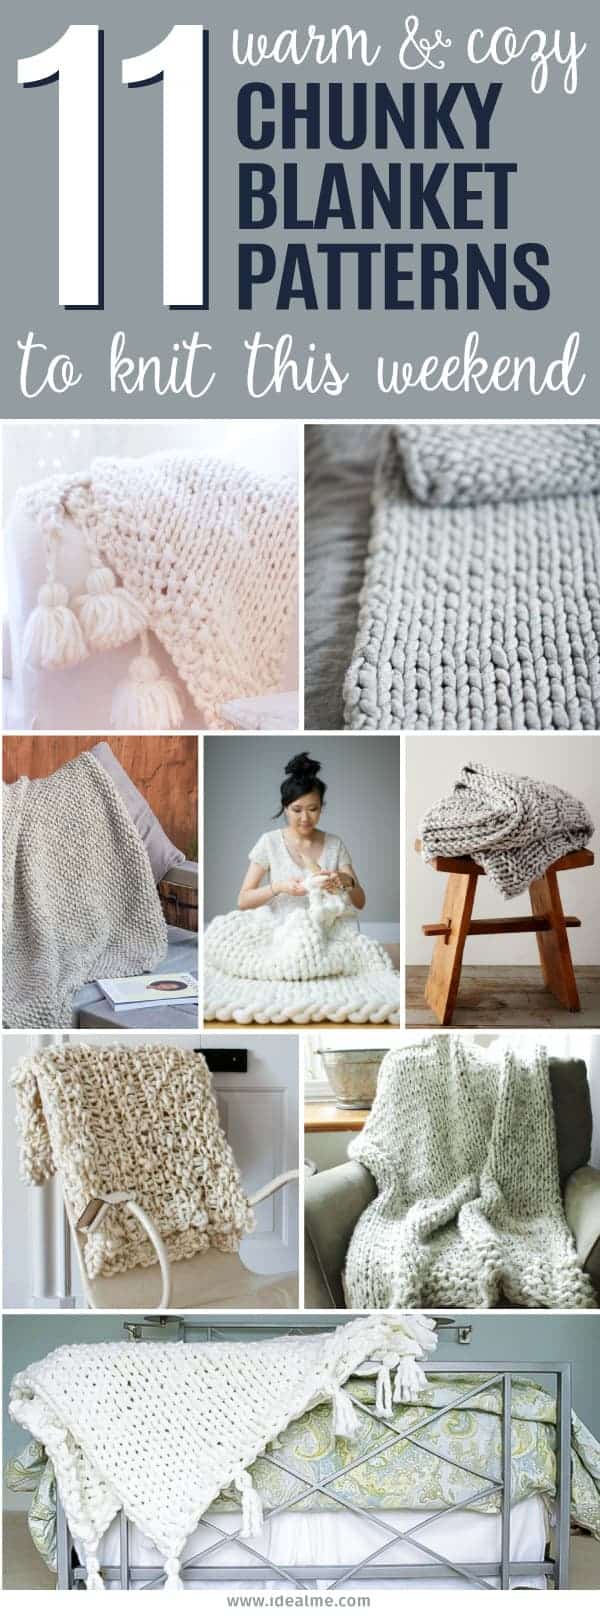 11 Cozy Chunky Blankets You'll Want to Knit This Weekend - Ideal Me